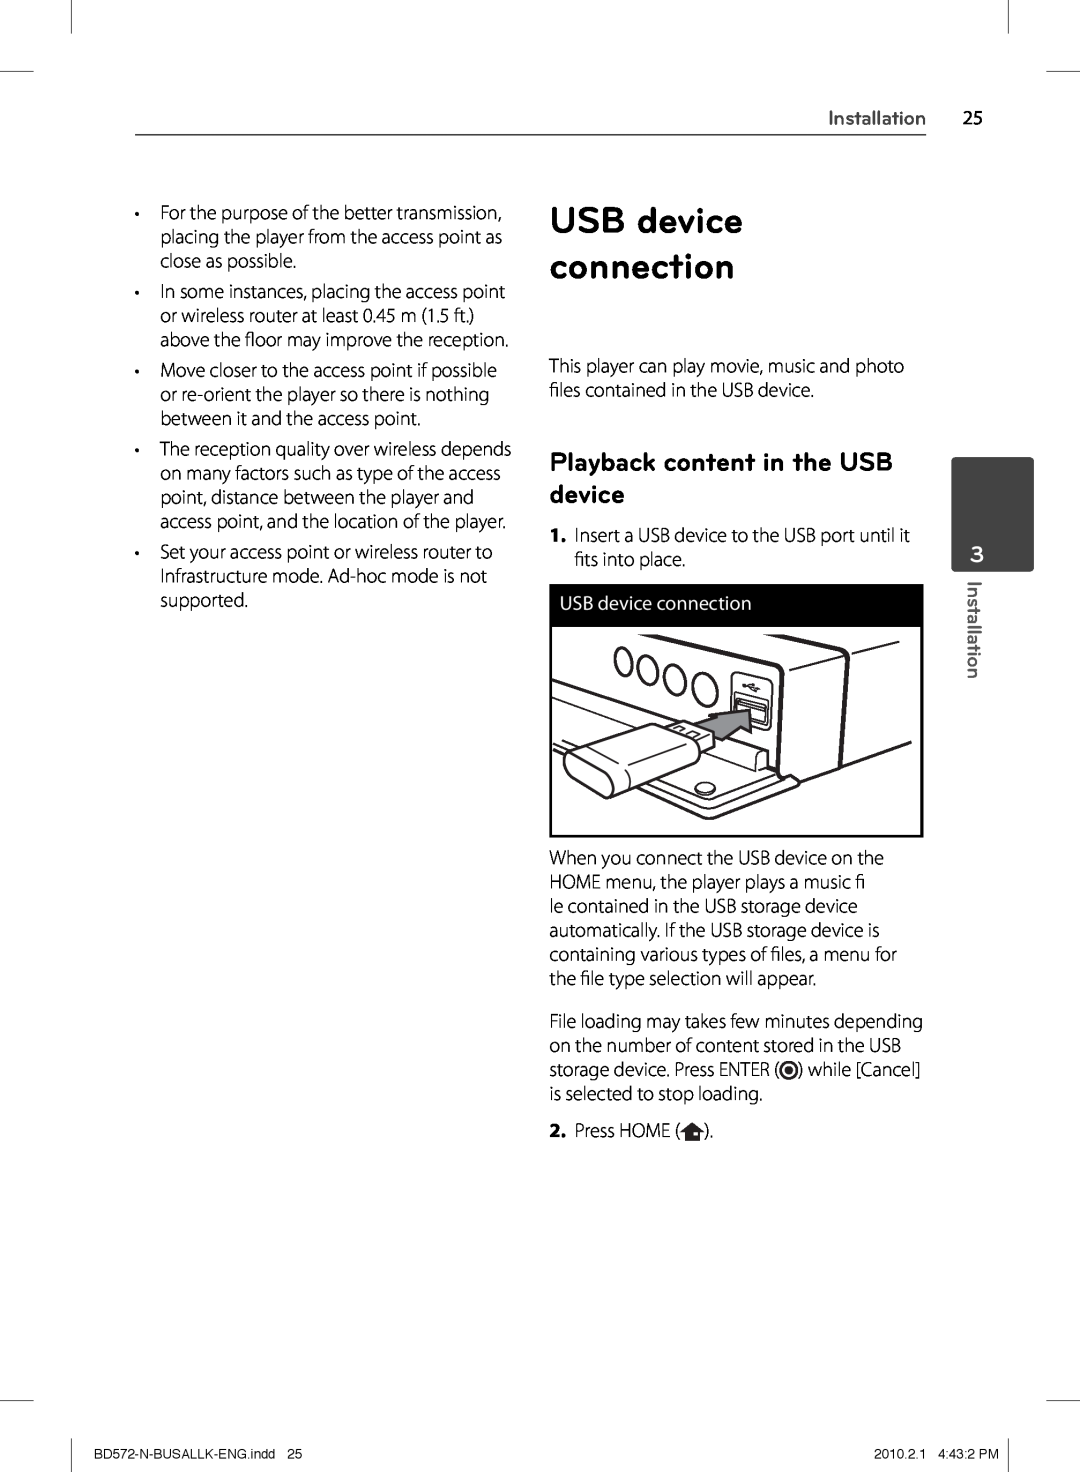 LG Electronics BD570 owner manual USB device connection, Playback content in the USB device, Installation 